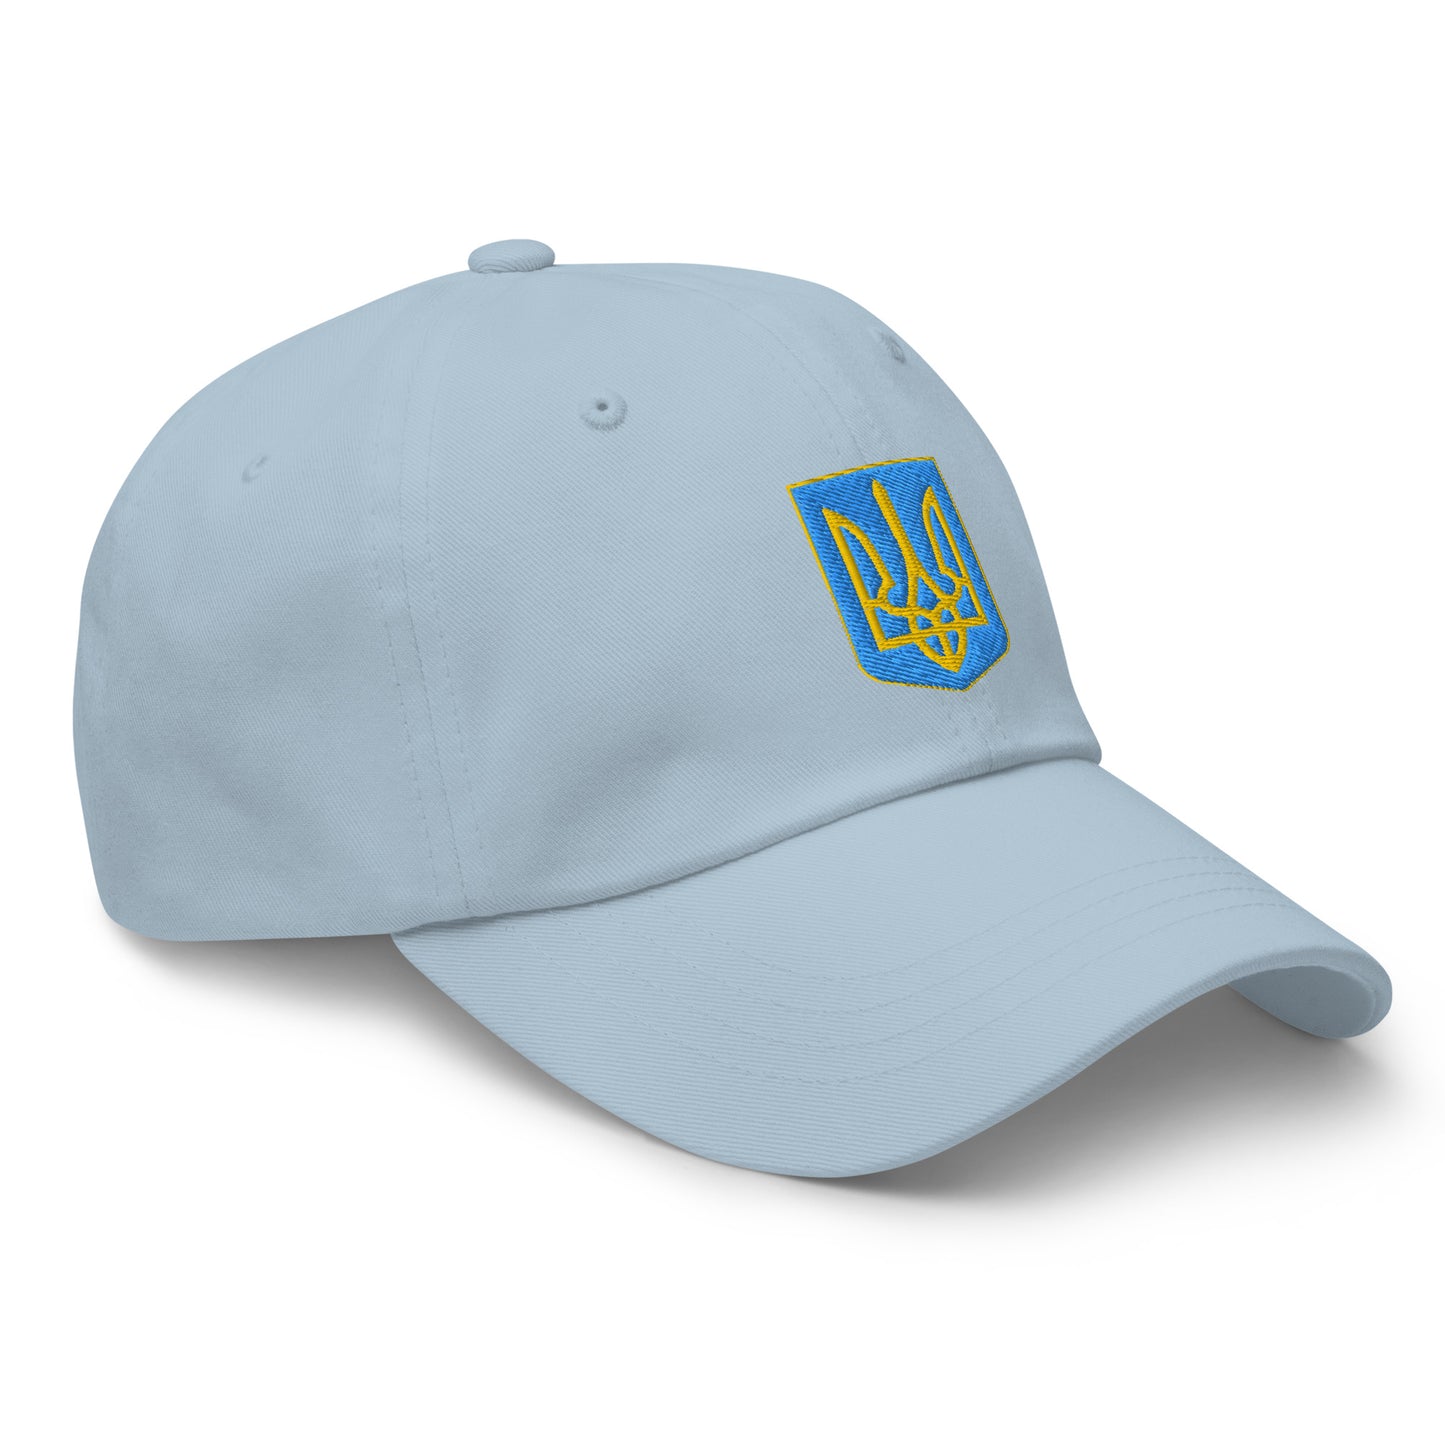 Show your support for Ukraine with this Embroidered light blue Dad Hat